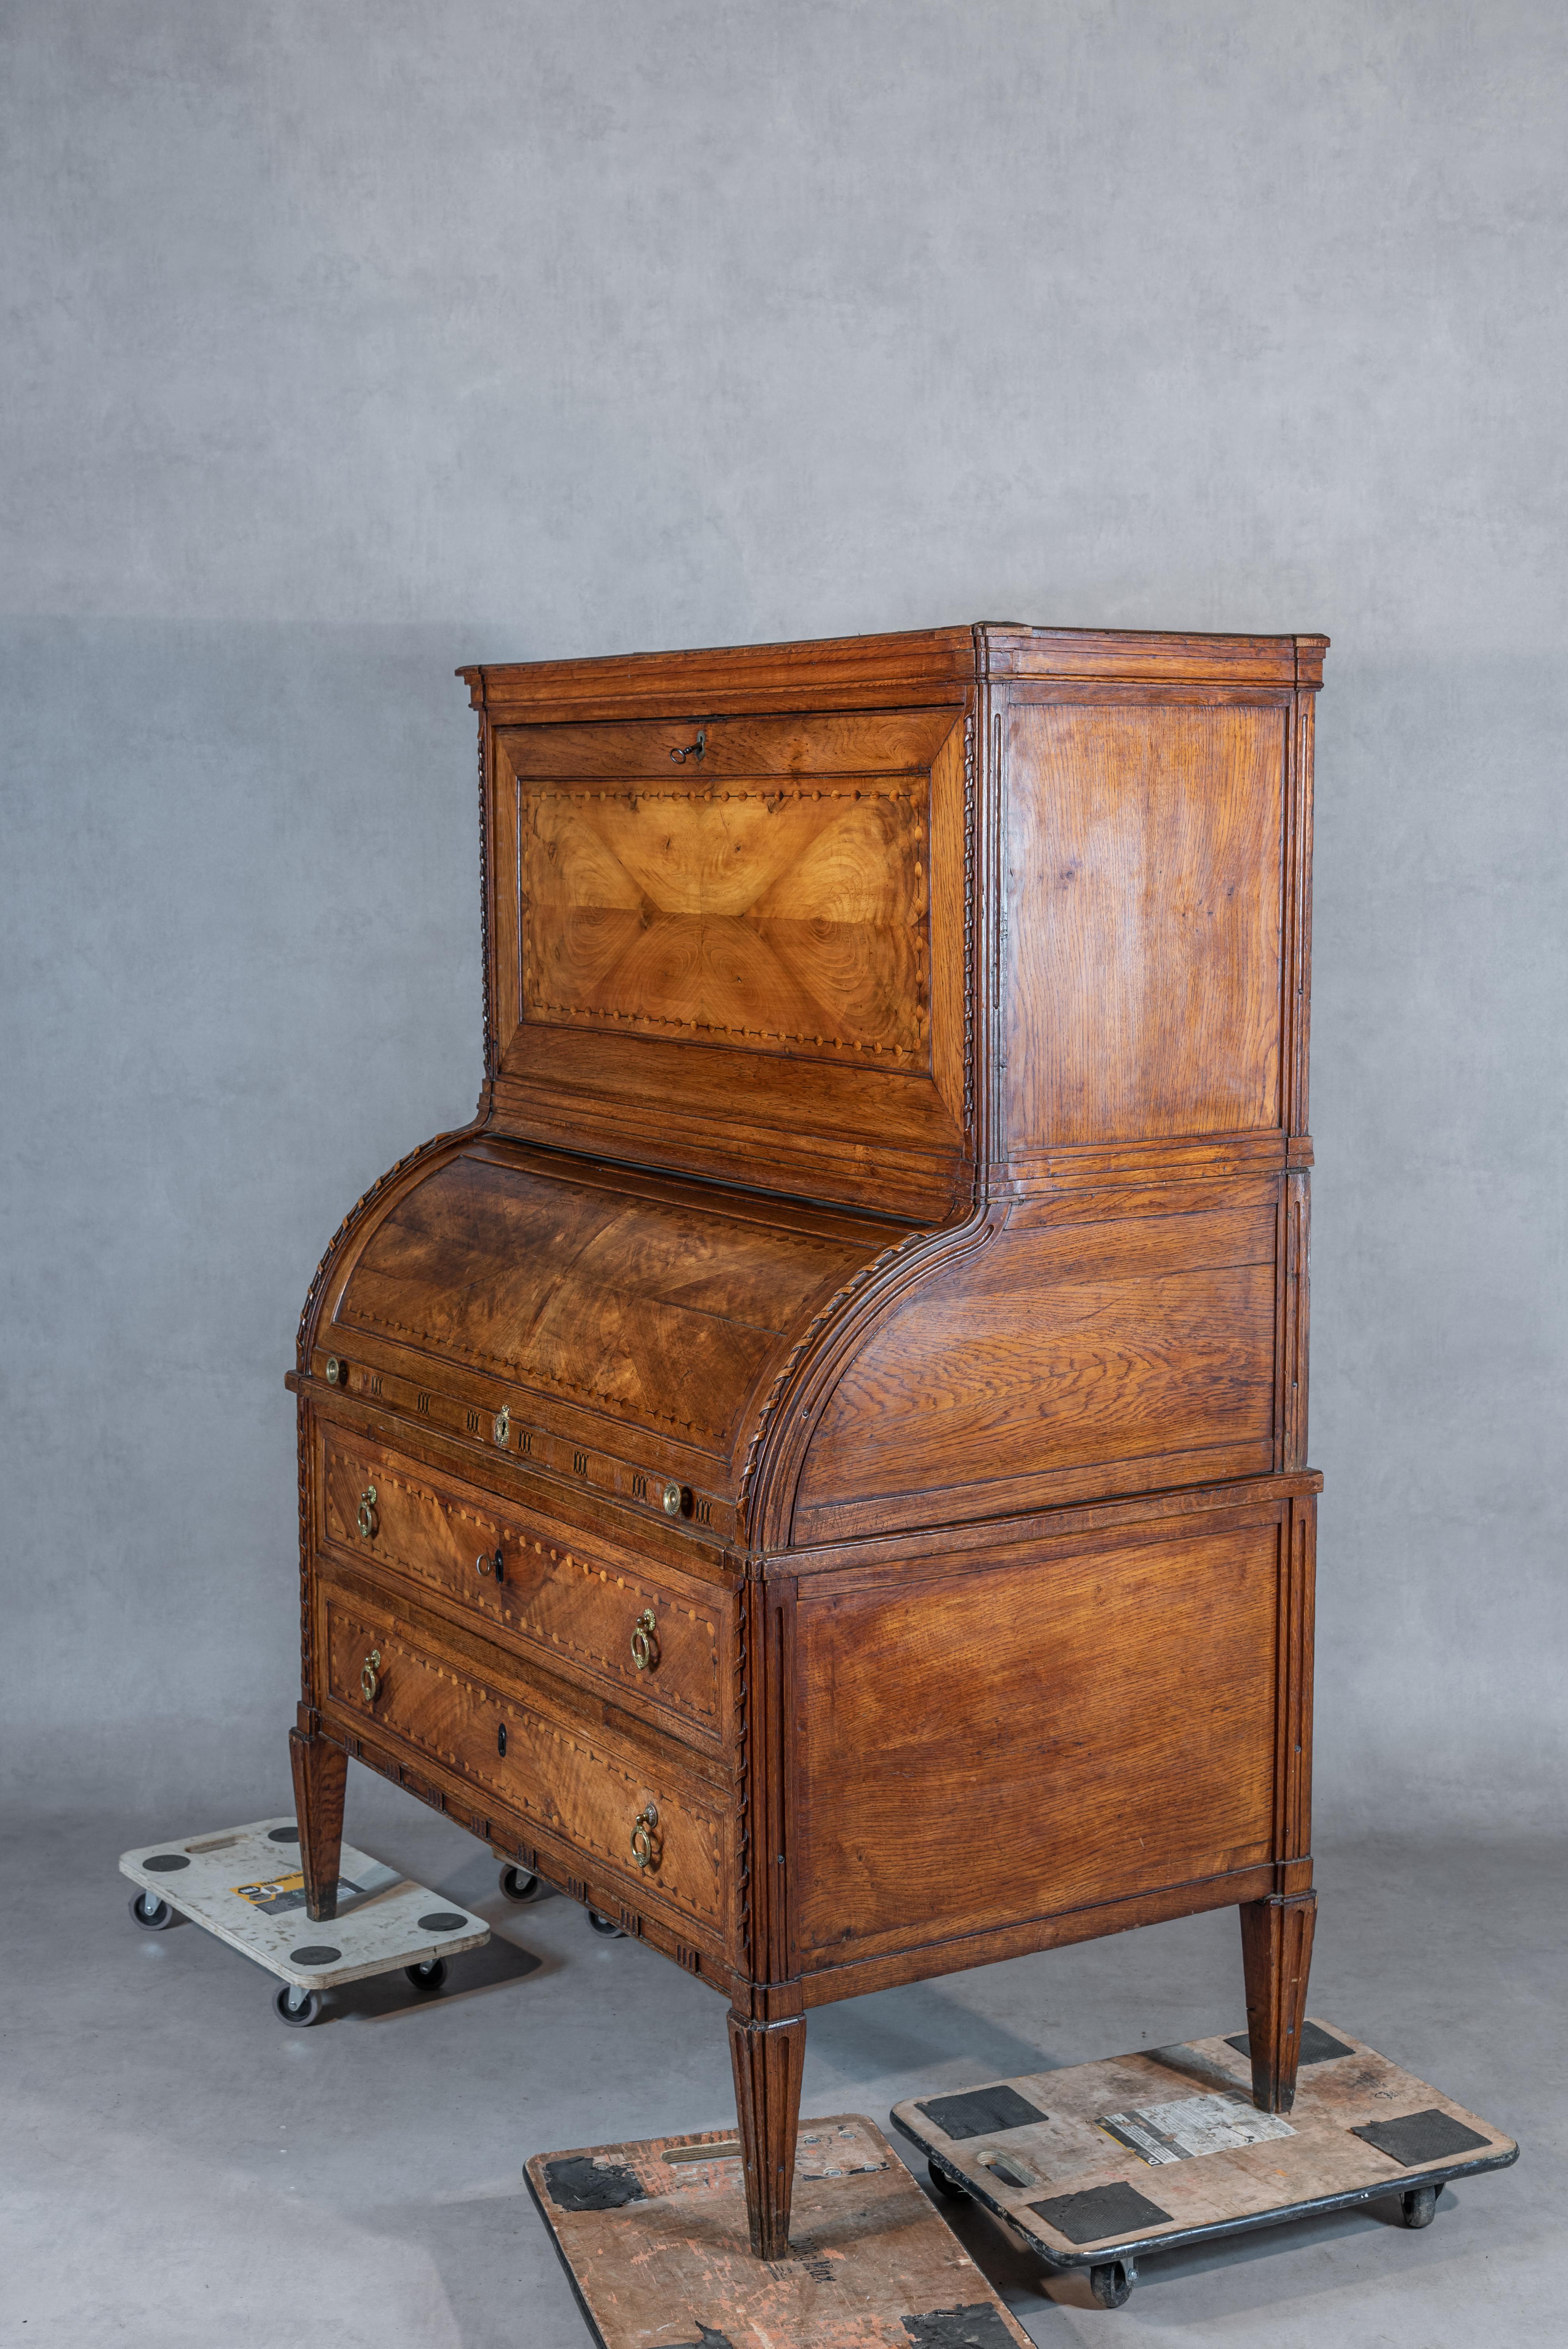 An exceptional French 18th century Louis XVI Period Marquetry Desk. This desk is known as a “bureau a cylindre”, referring to its curved pivoted opening in the middle. The woodwork on this piece is spectacular: made of solid oak and featuring